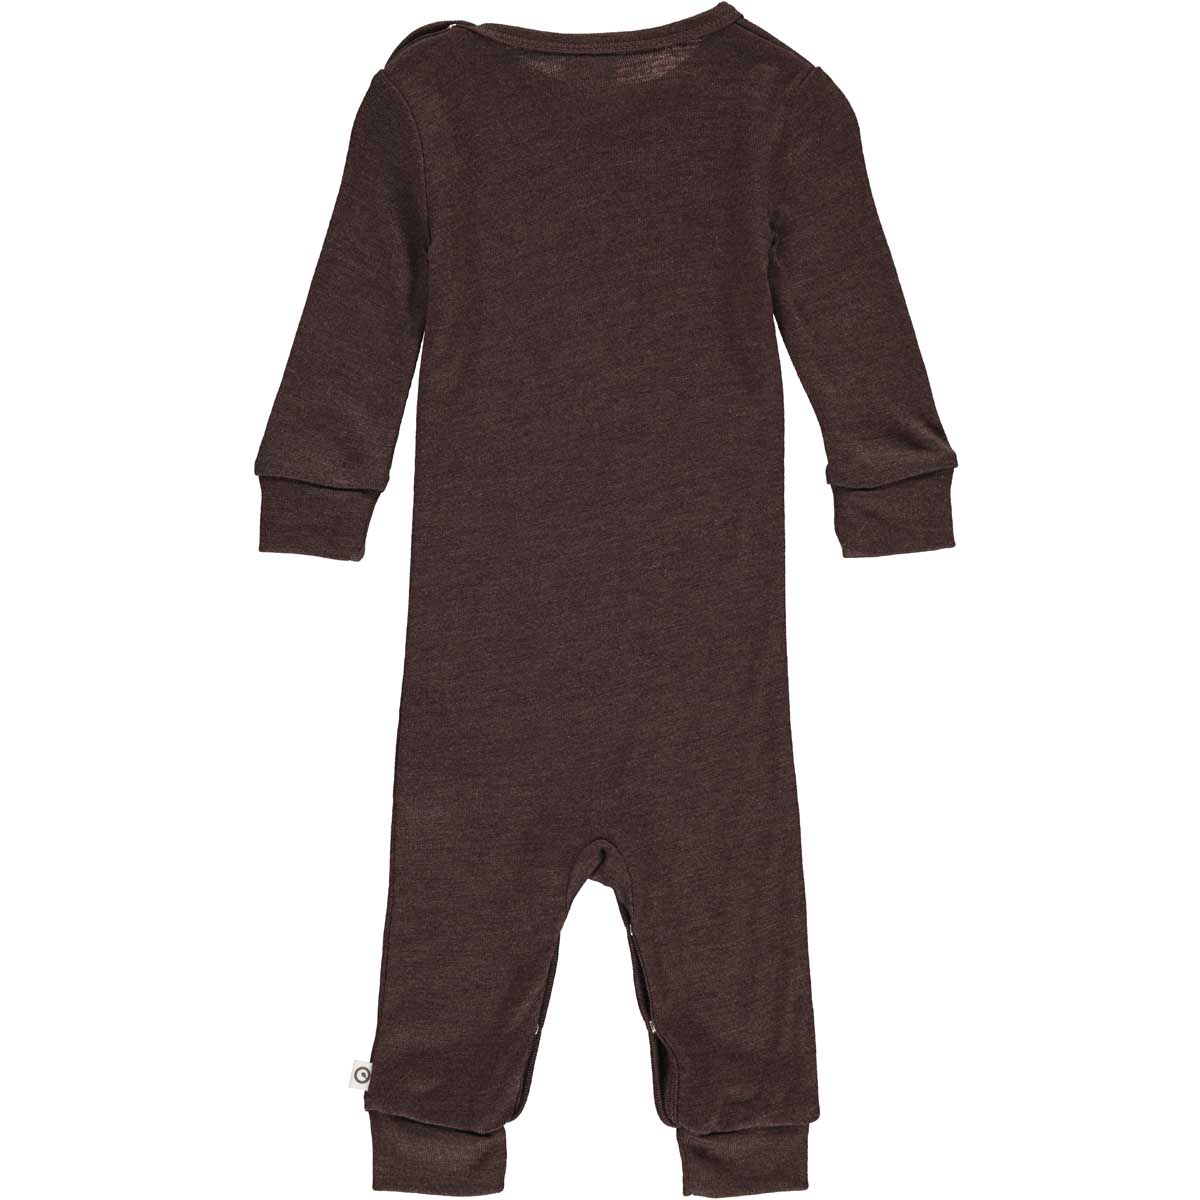 MAMA.LICIOUS Wool baby-one-piece suit -Coffee - 1584052300